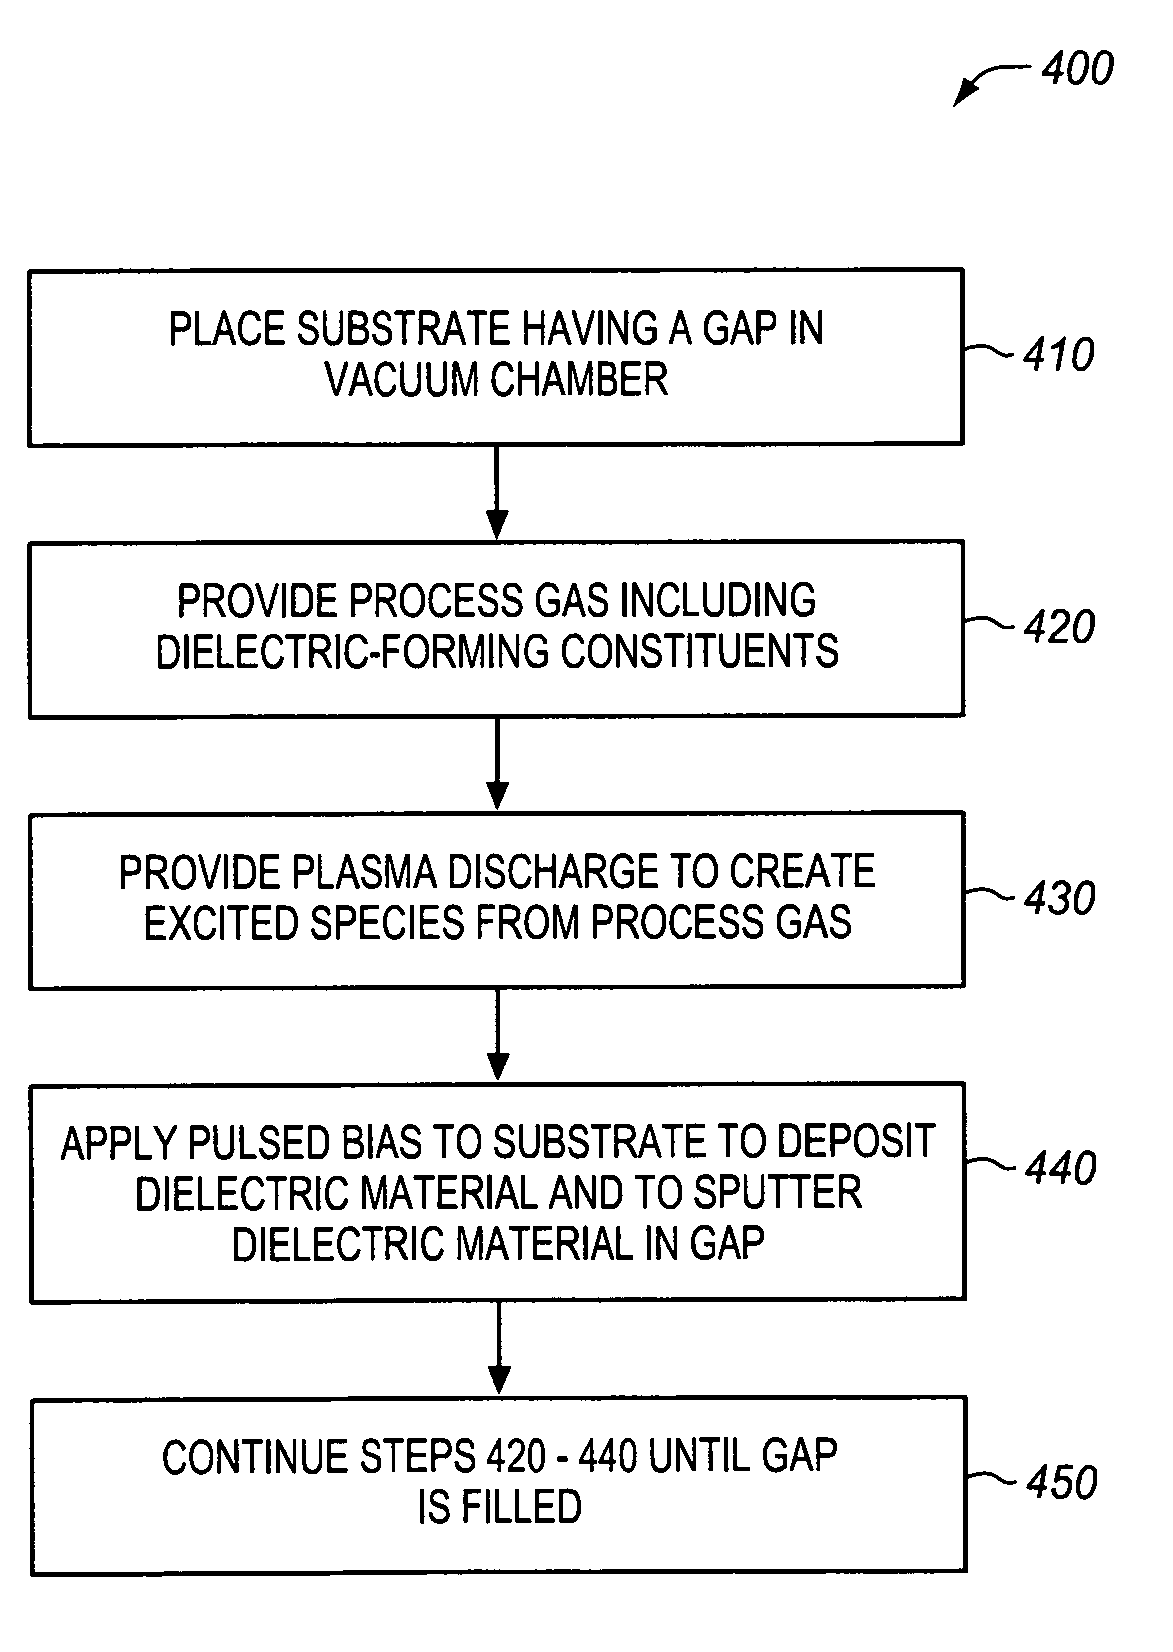 Pulsed bias having high pulse frequency for filling gaps with dielectric material